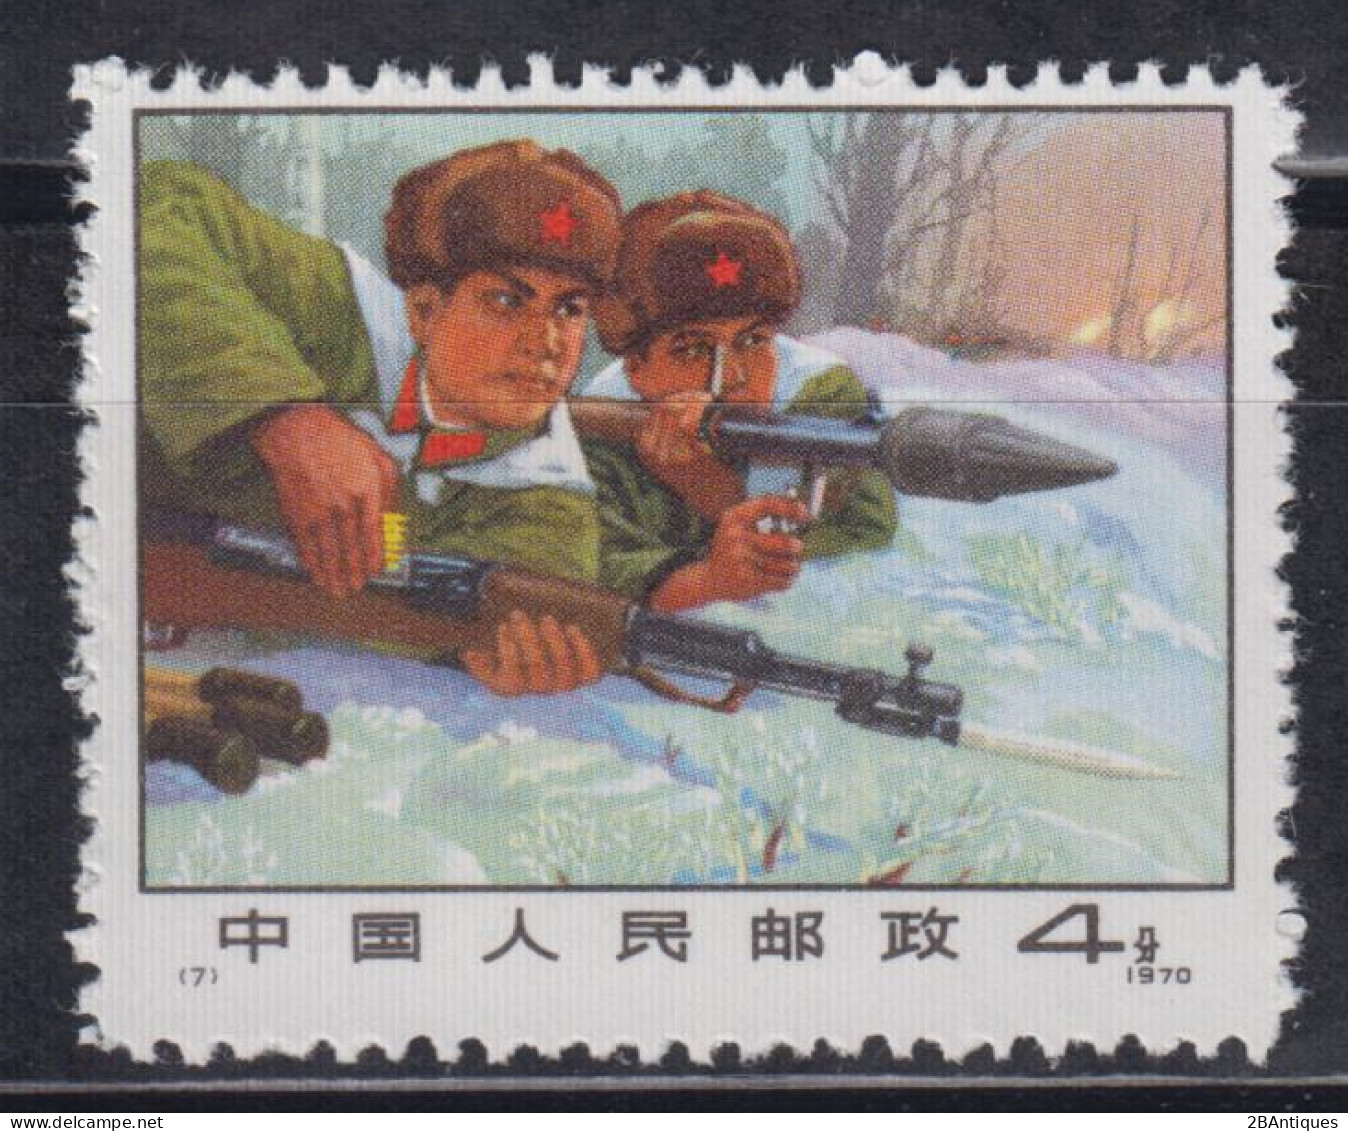 PR CHINA 1970 - The 2nd Anniversary Of Defence Of Chen Pao Tao MNH** XF - Unused Stamps